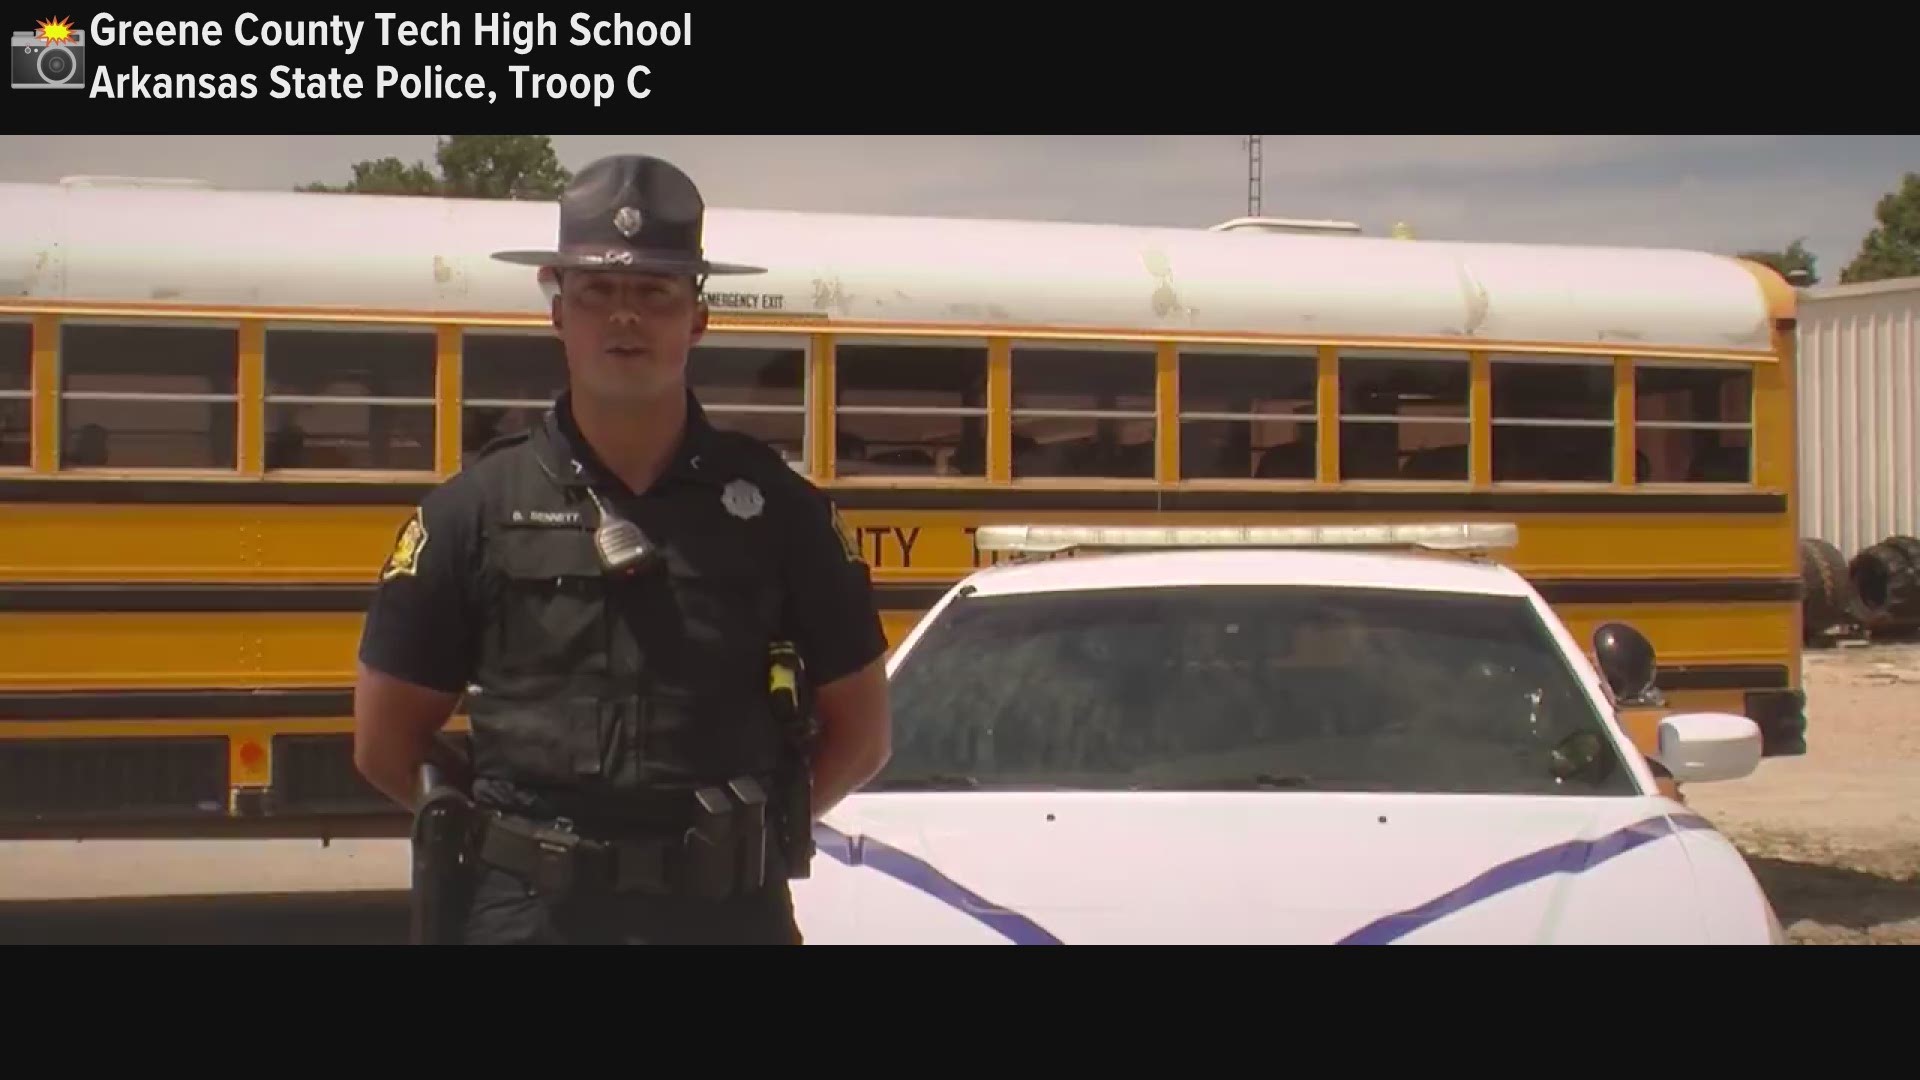 In 2017, Greene County Tech High School created a video with help from a few Troop C troopers to remind people about school bus safety.